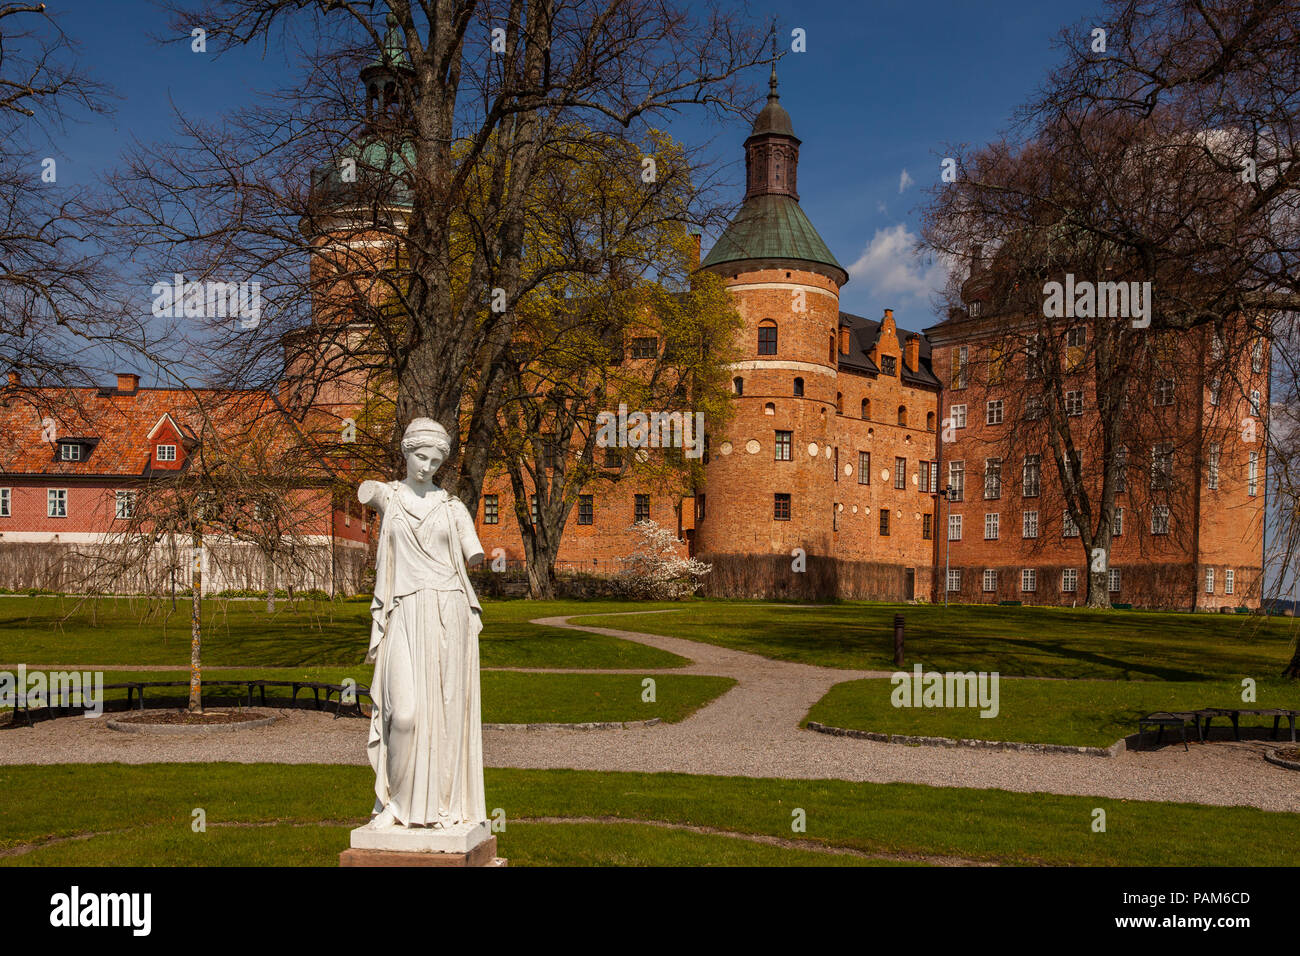 Schloß Gripsholm a Mariefred Foto Stock